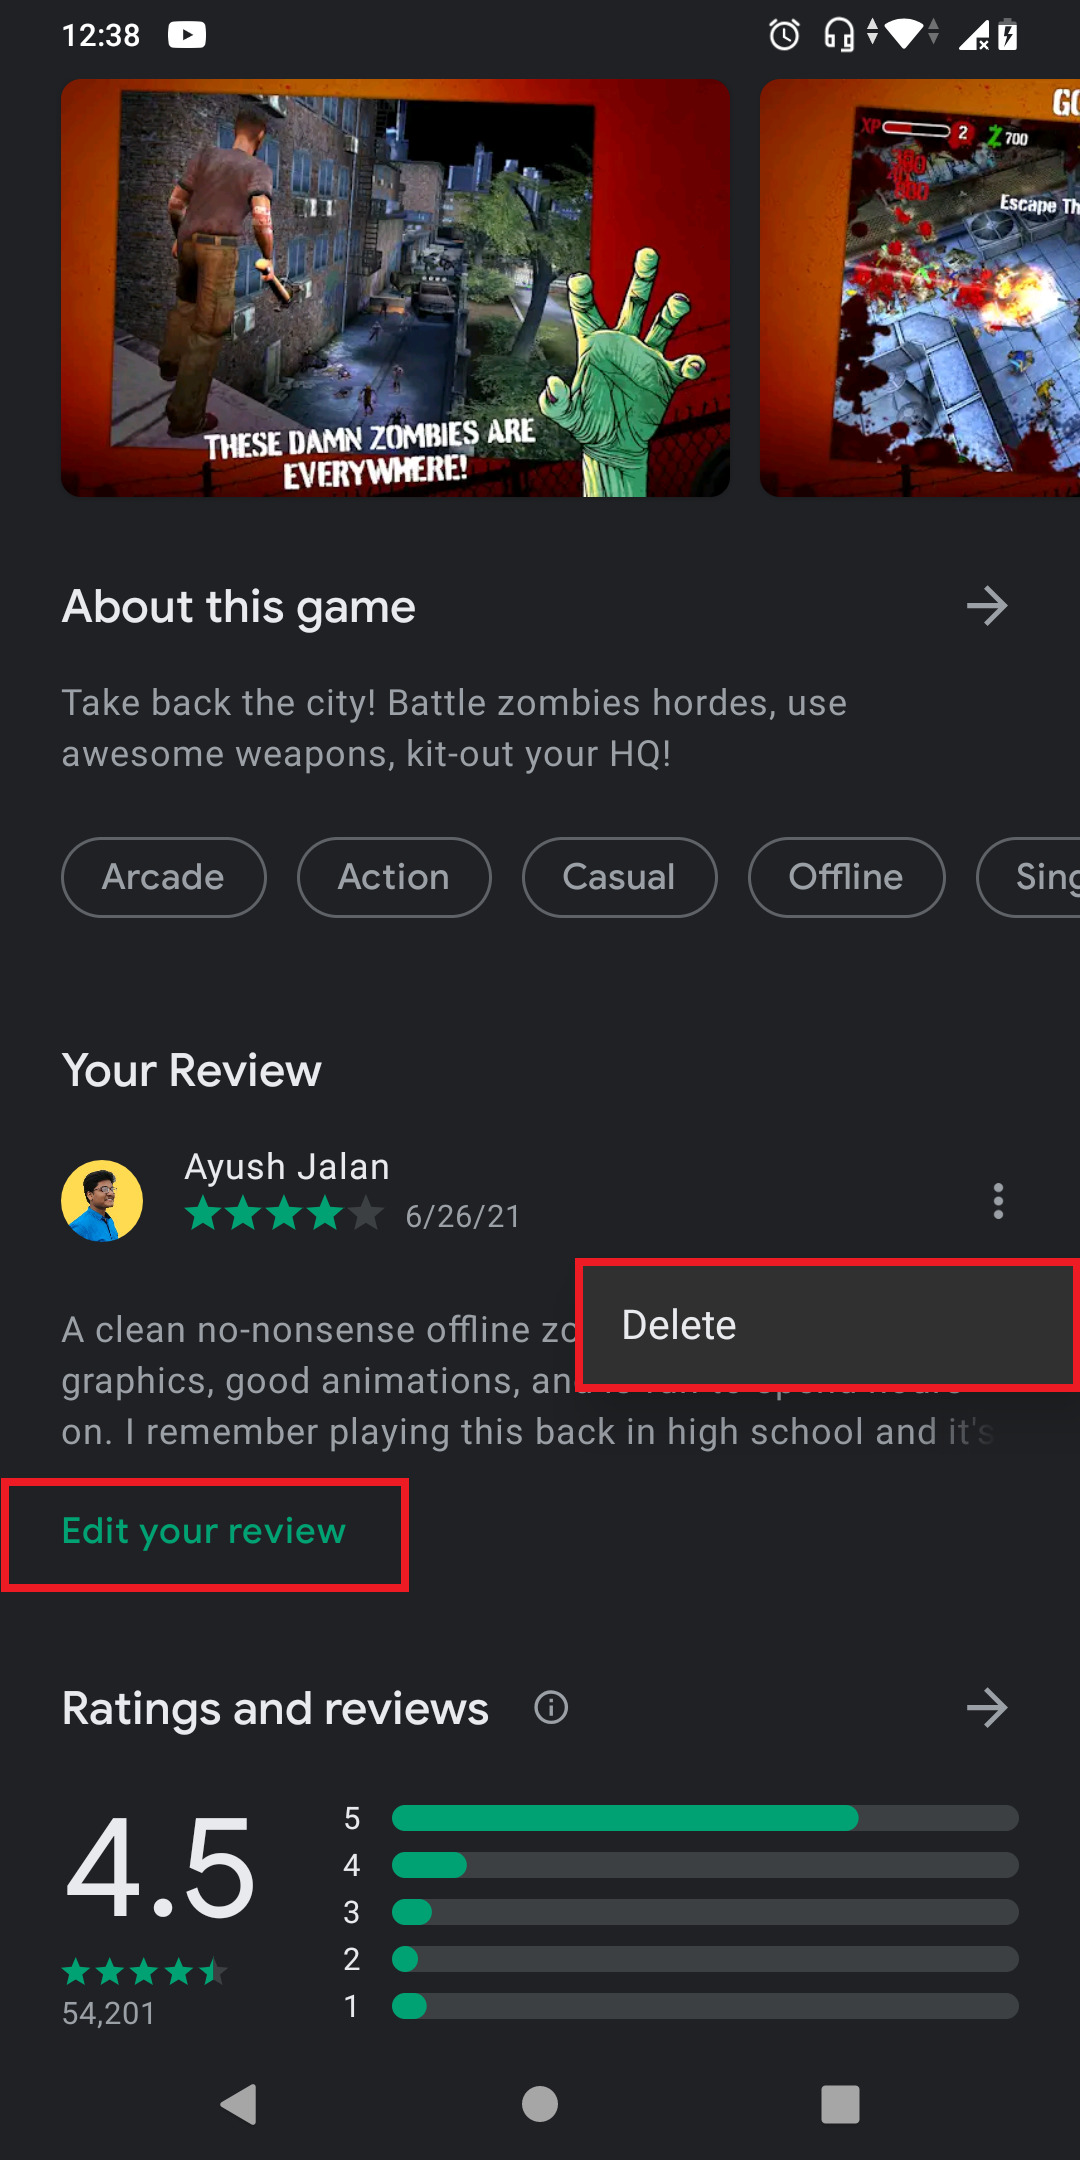 How to Write and Edit Reviews on the Google Play Store